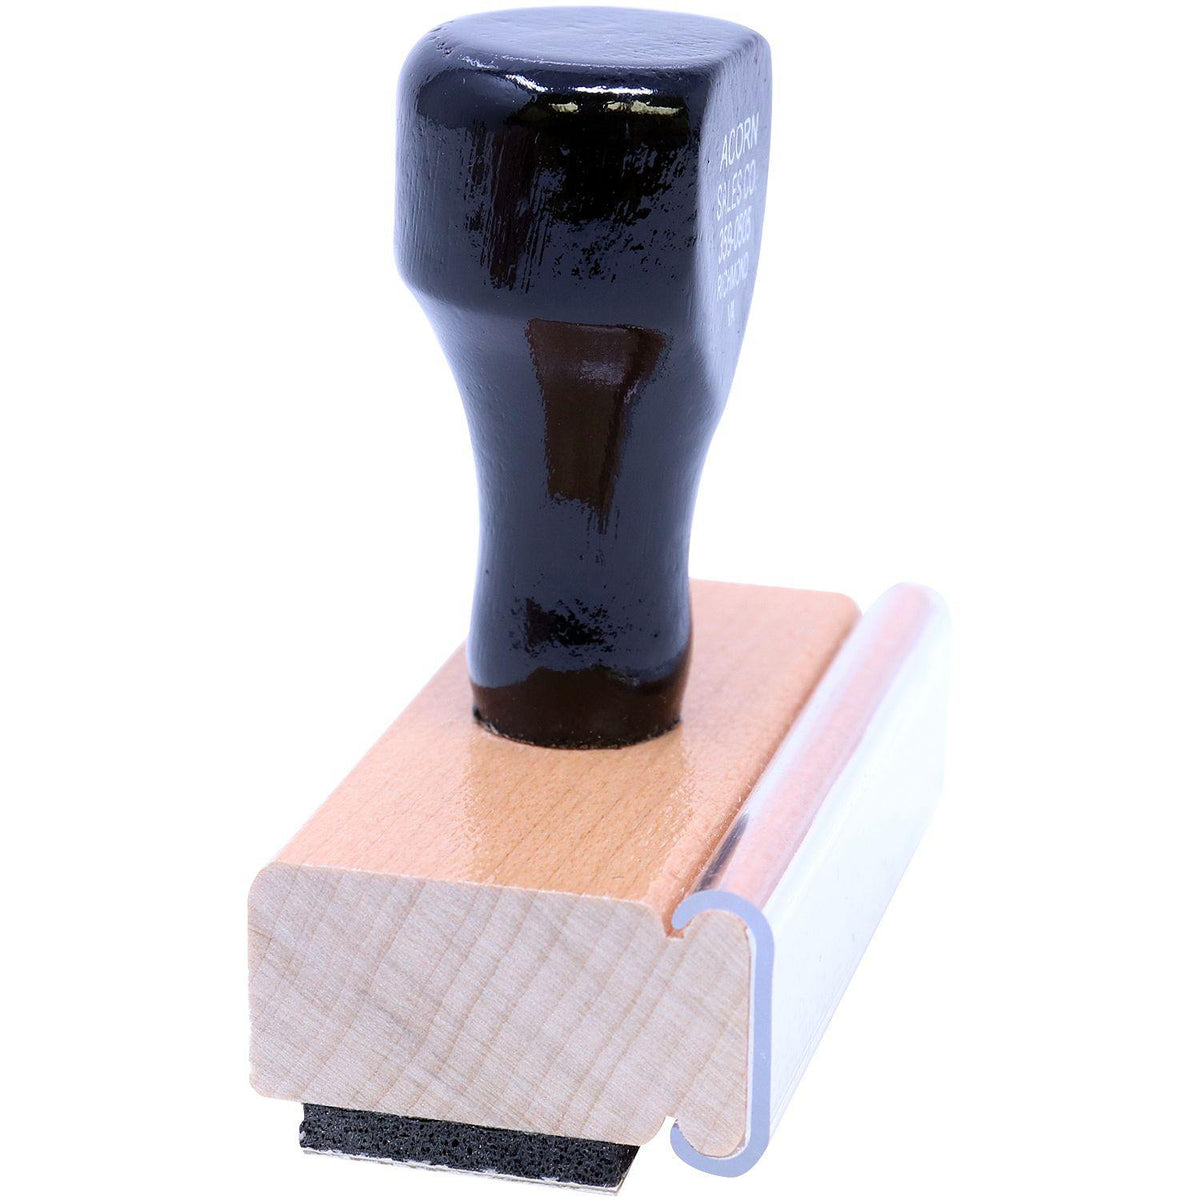 Side View of Large Medicade Rubber Stamp at an Angle